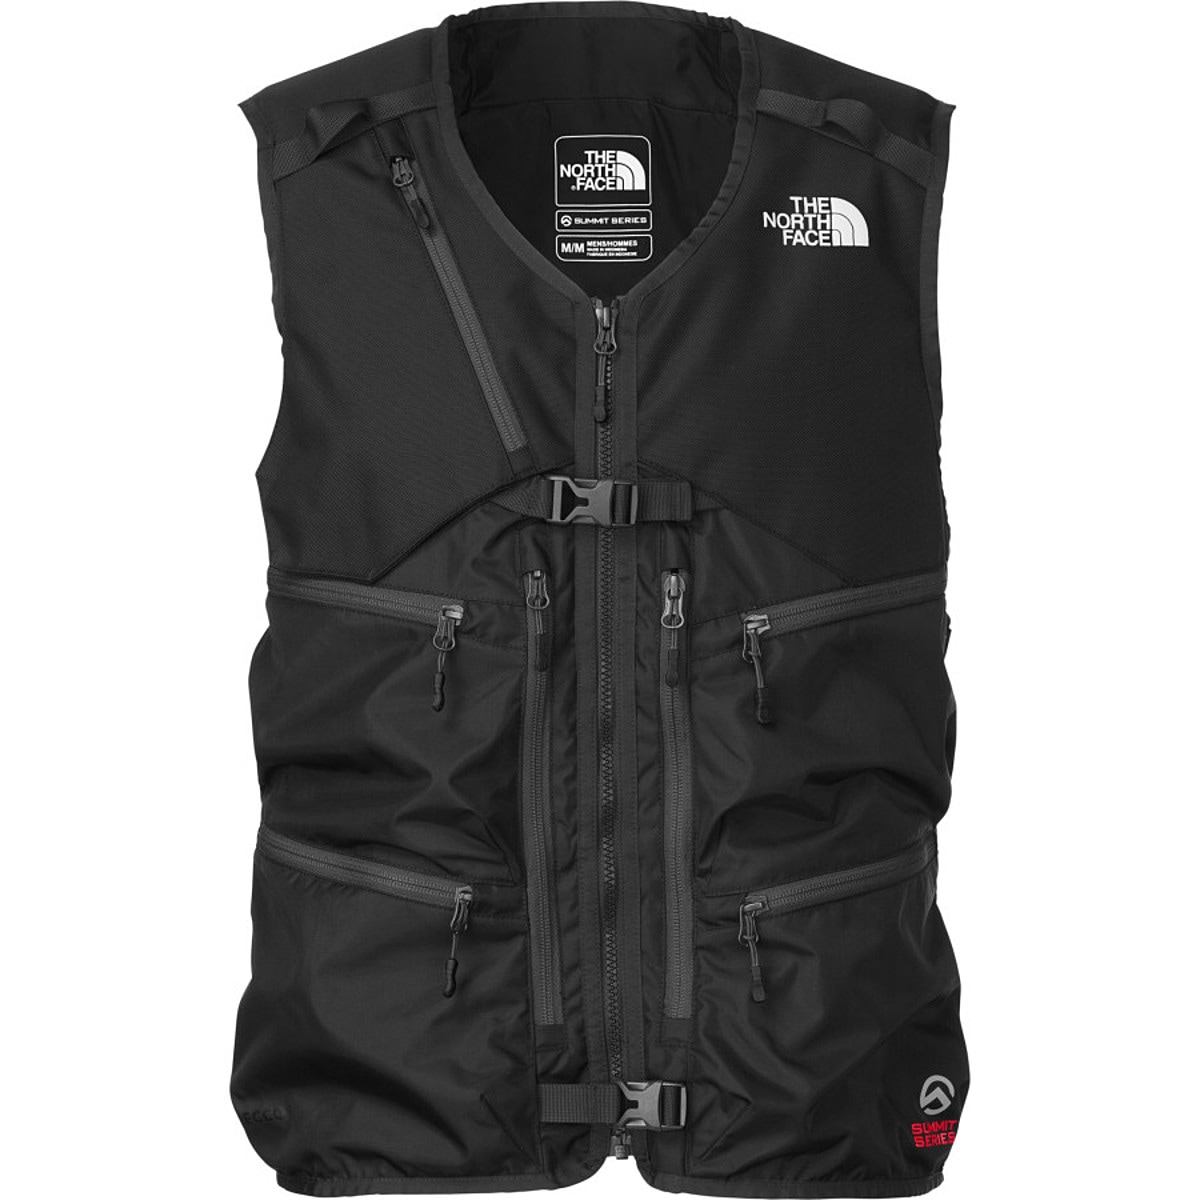 The North Face Powder Guide Vest - Men's - Clothing